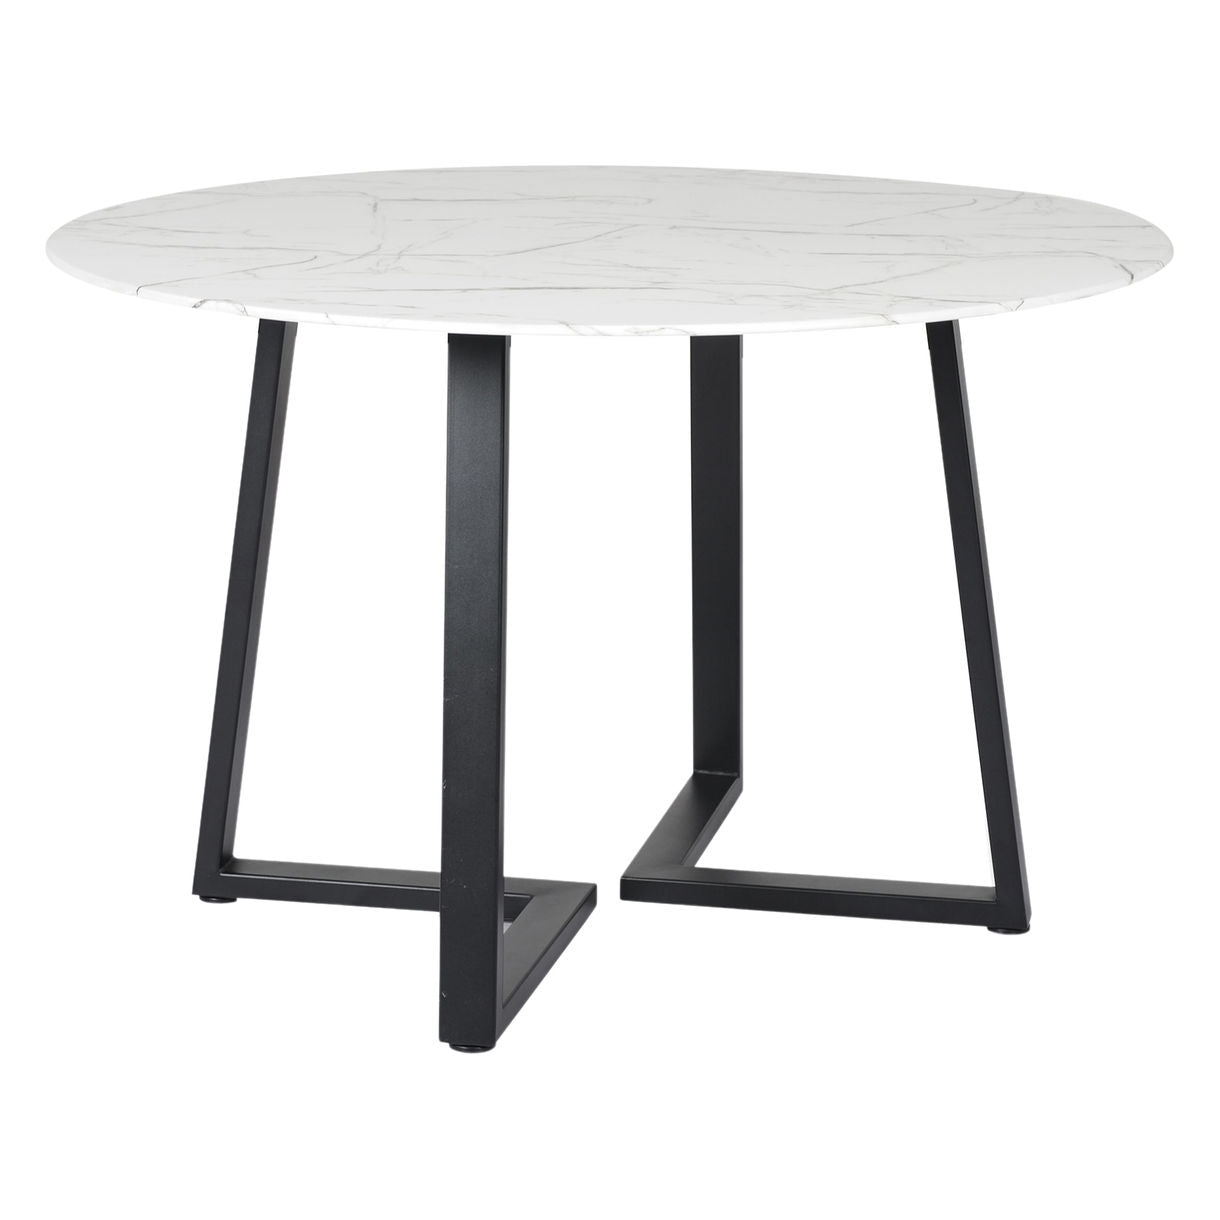 Fugura Round 6 Seater Marble Dining Table In Black Finish